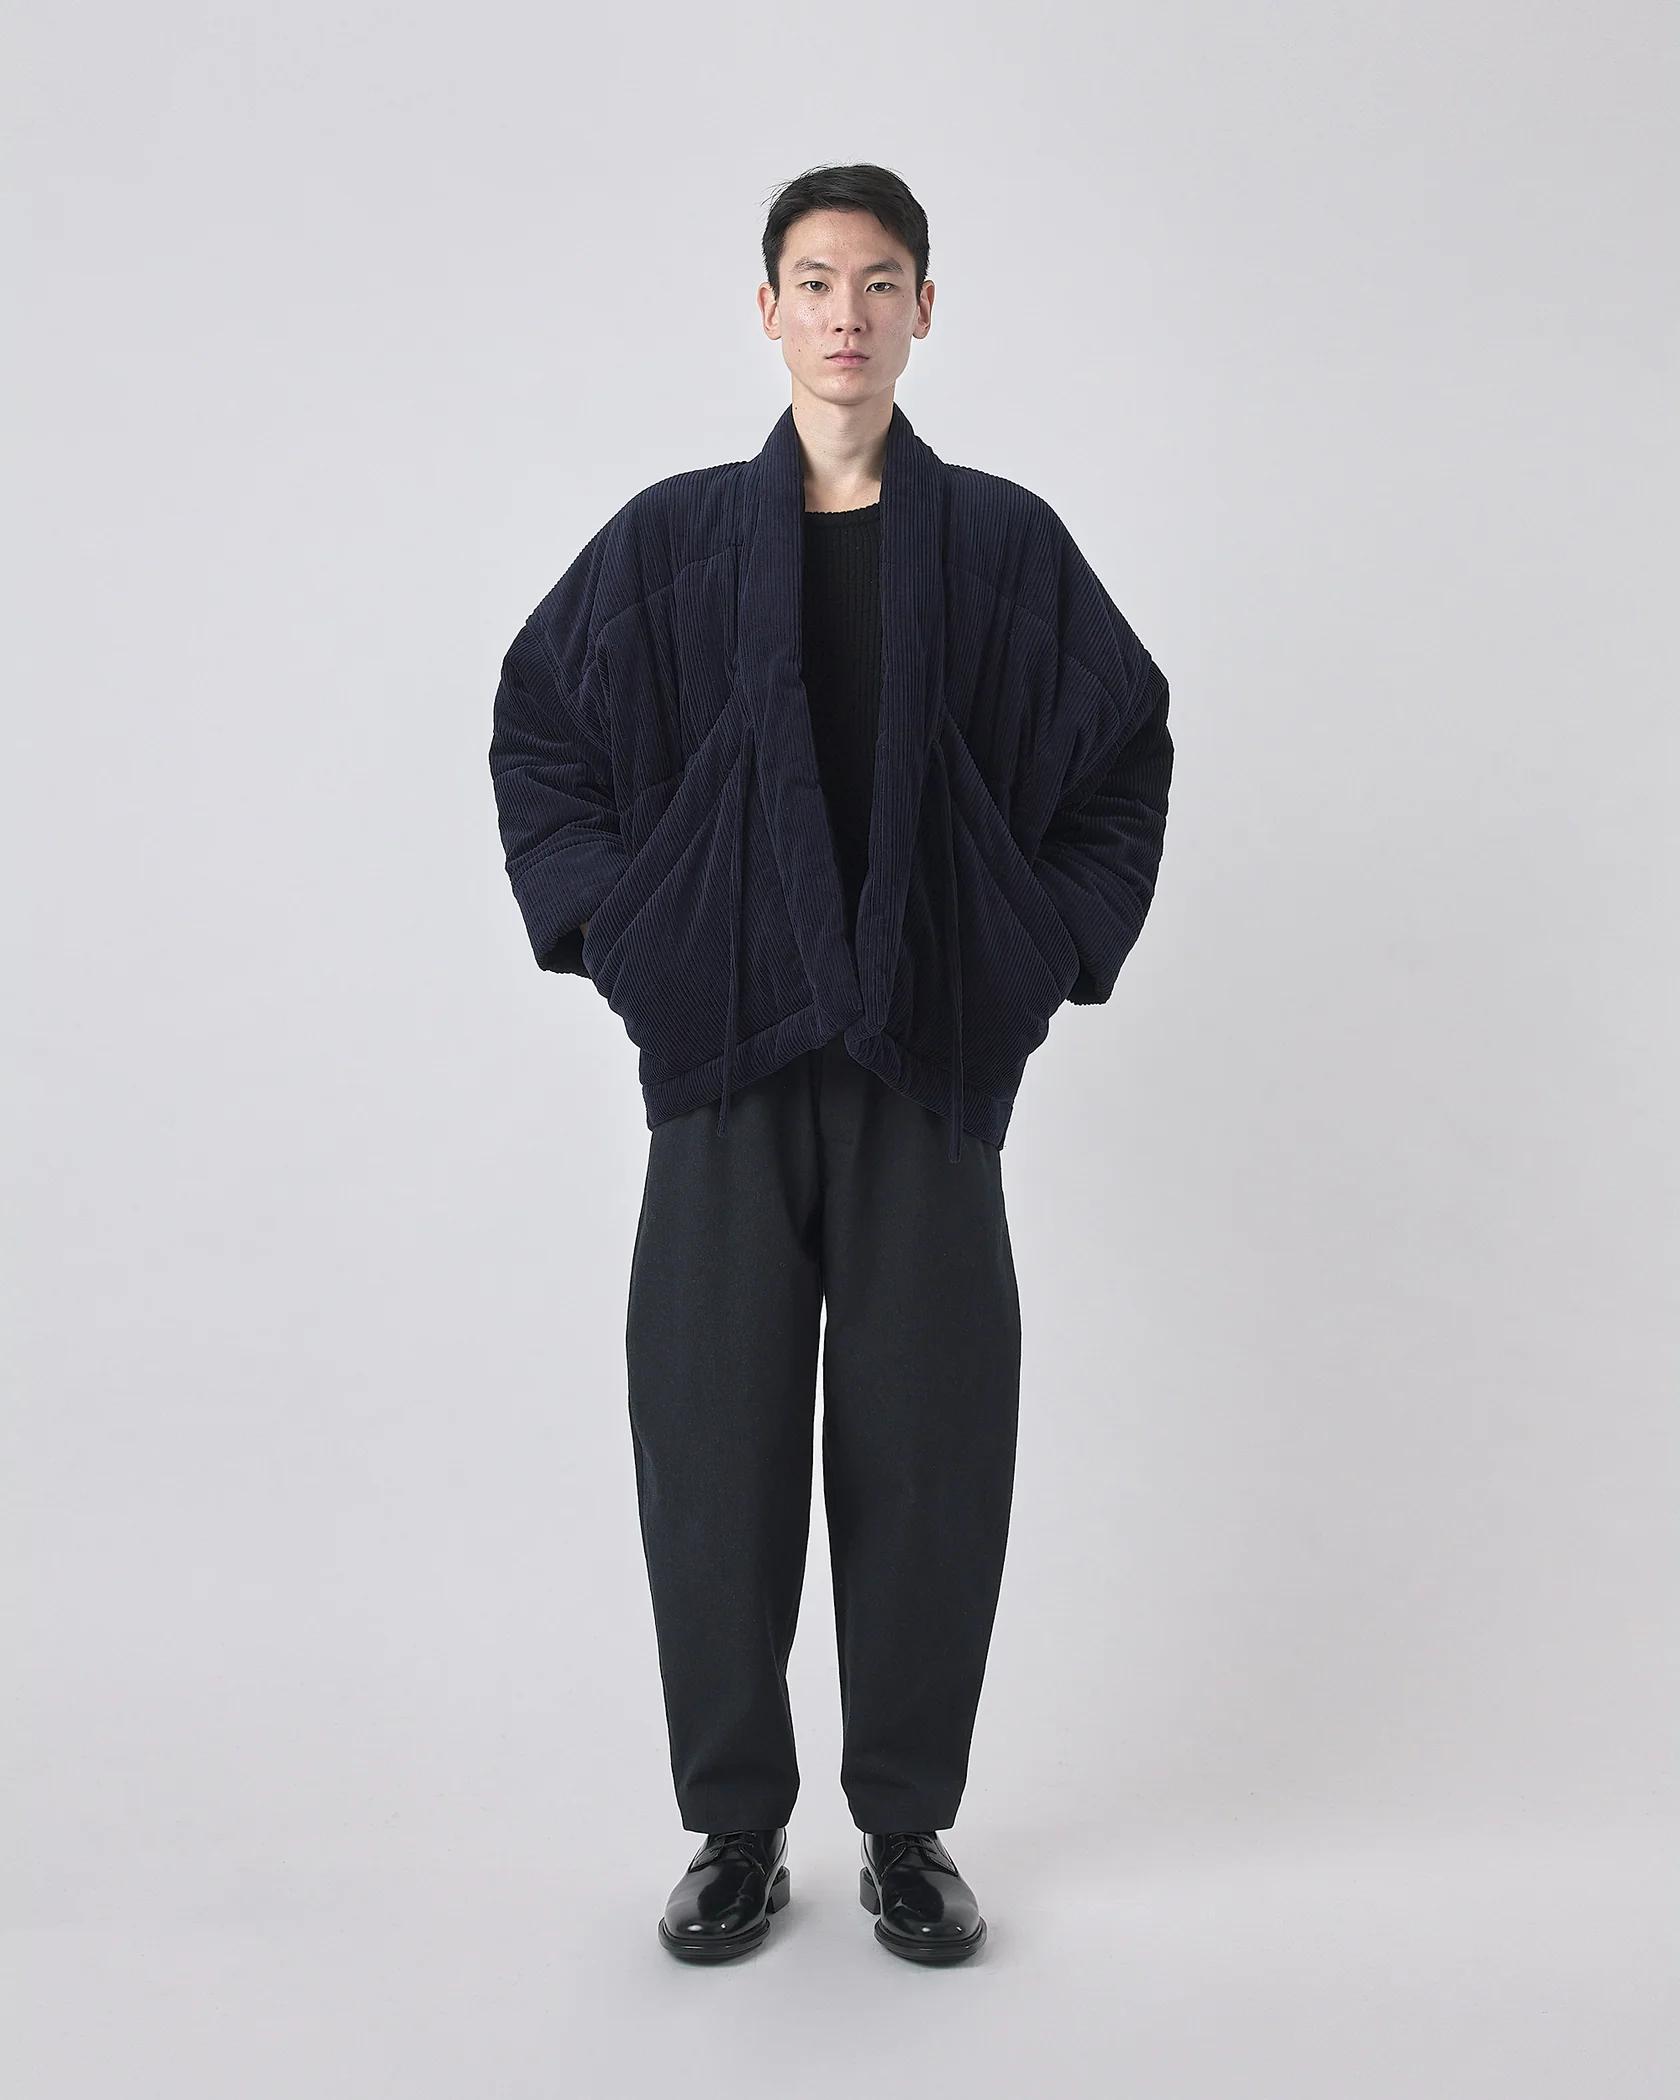 Product Image for Corduroy Sumo Puffer, Navy